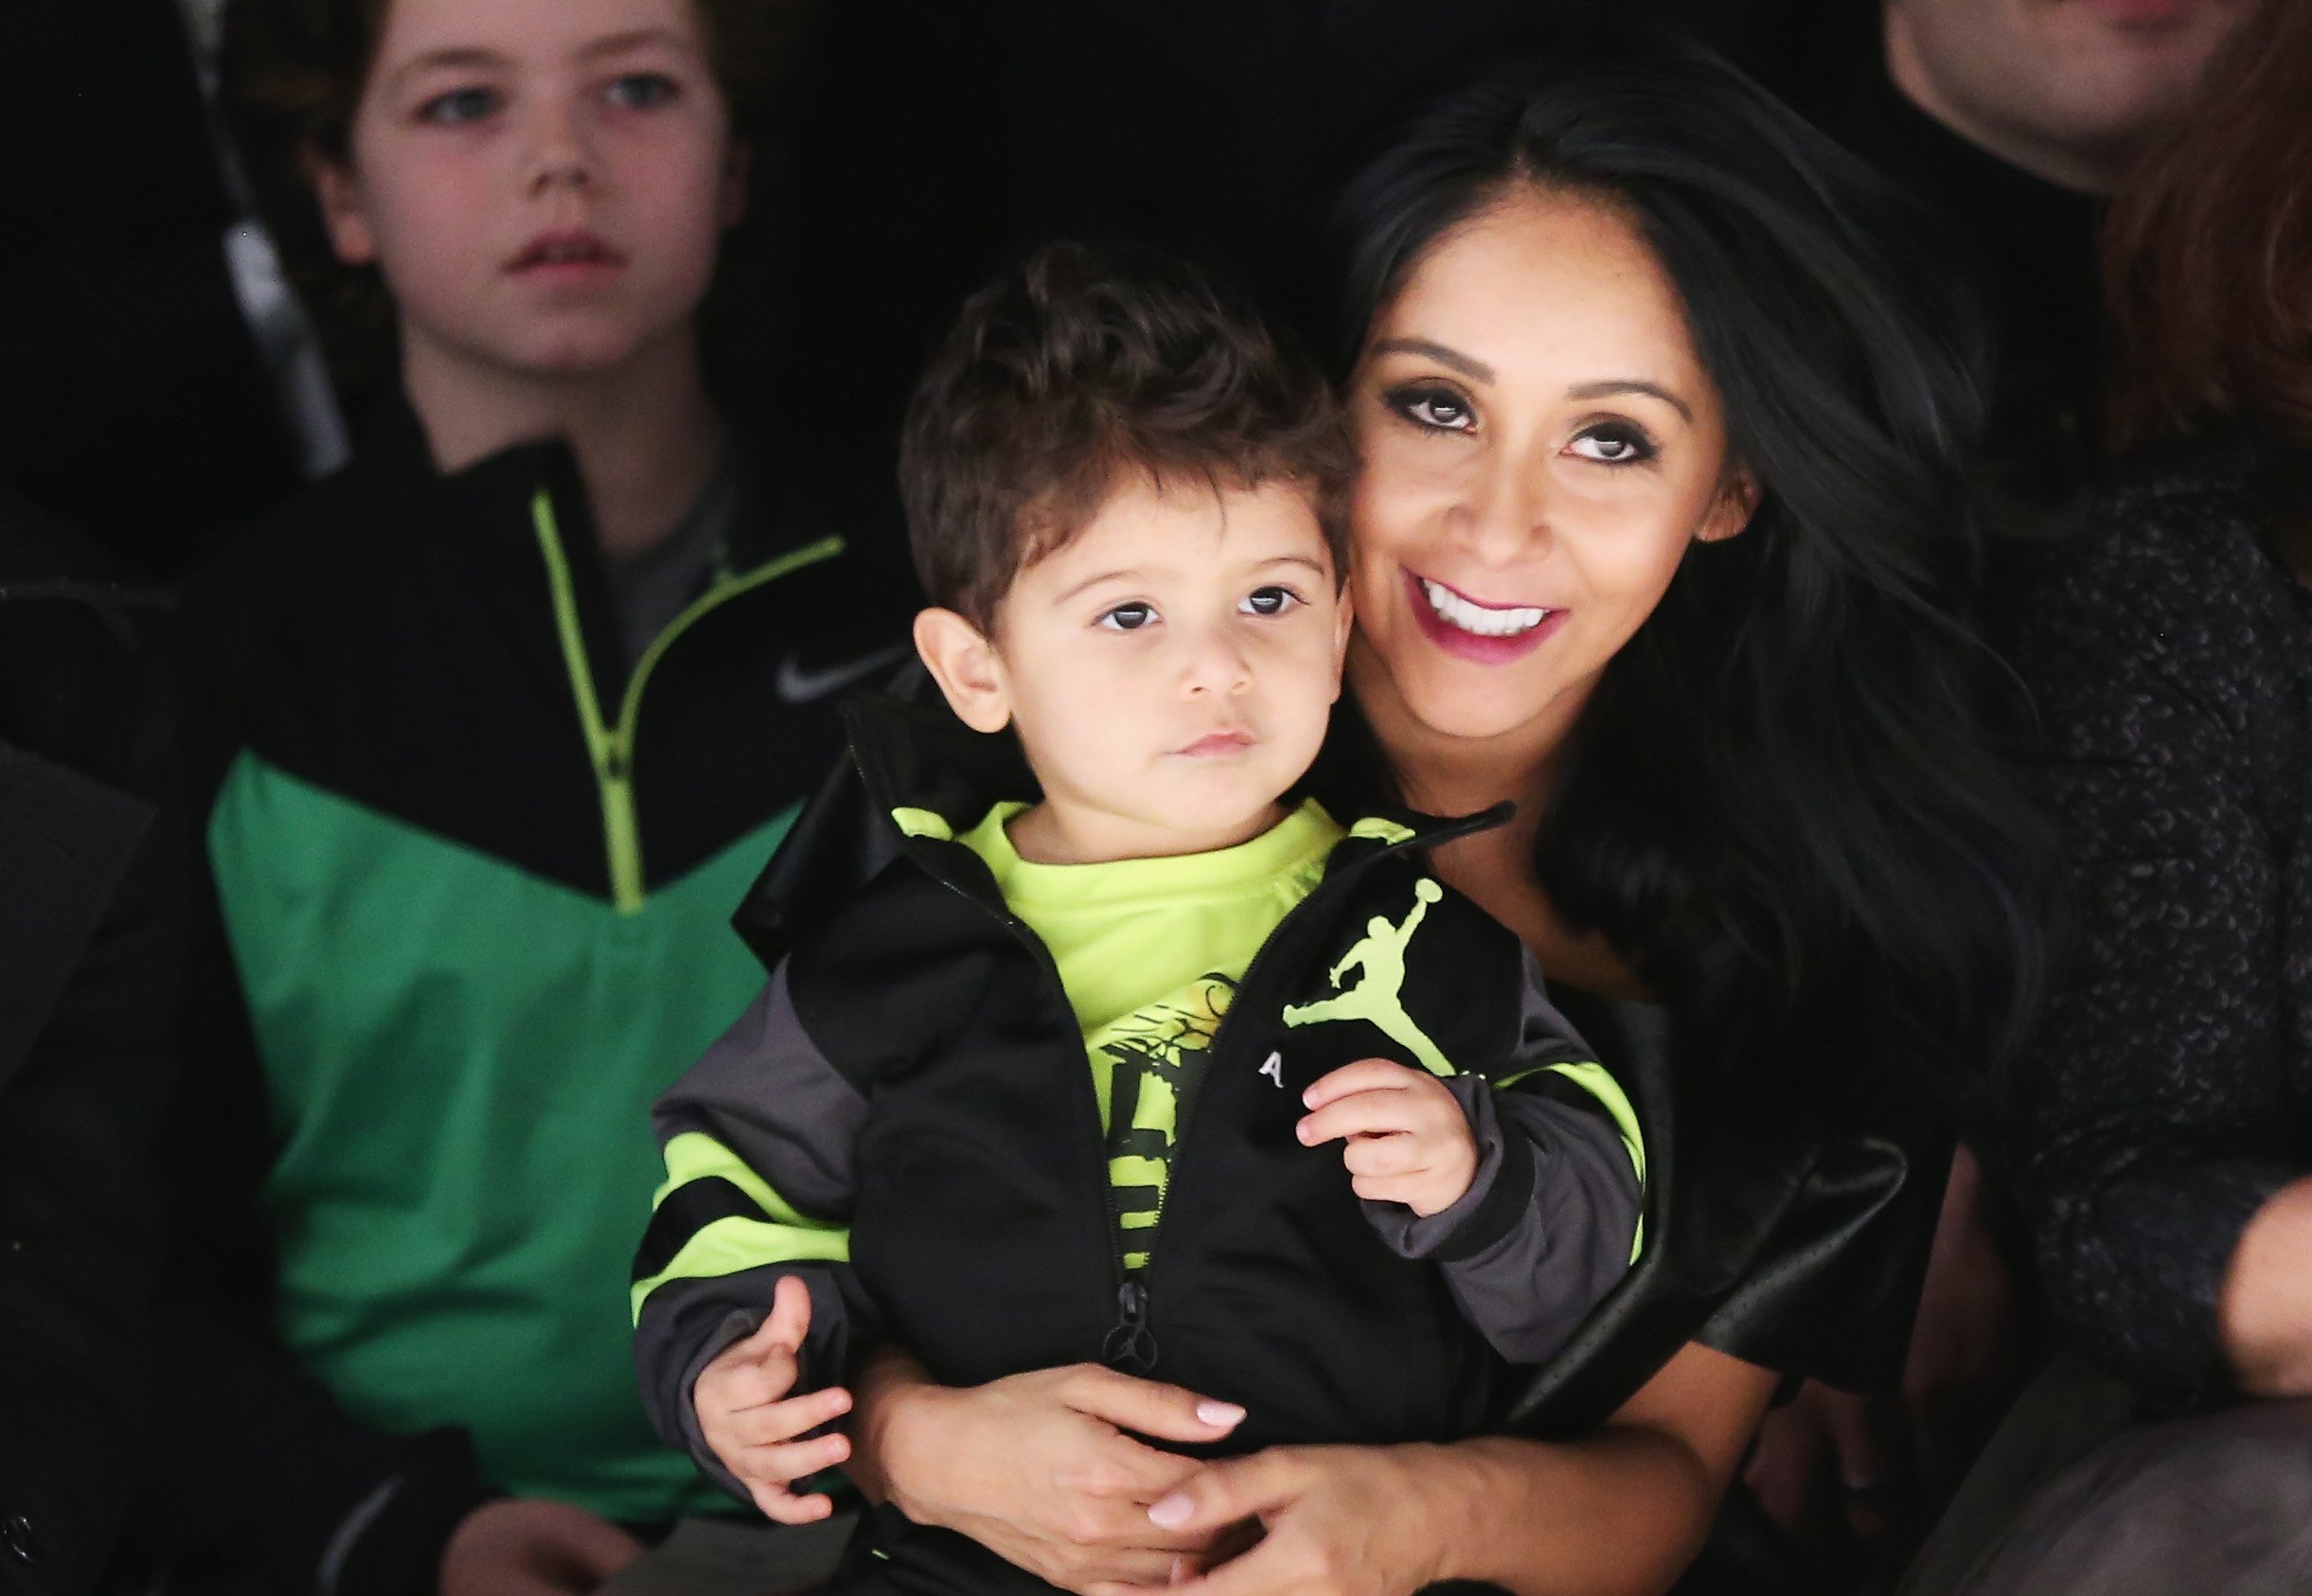 Nicole 'Snooki' Polizzi holding one of her kids, Lorenzo LaValle, in February 2015